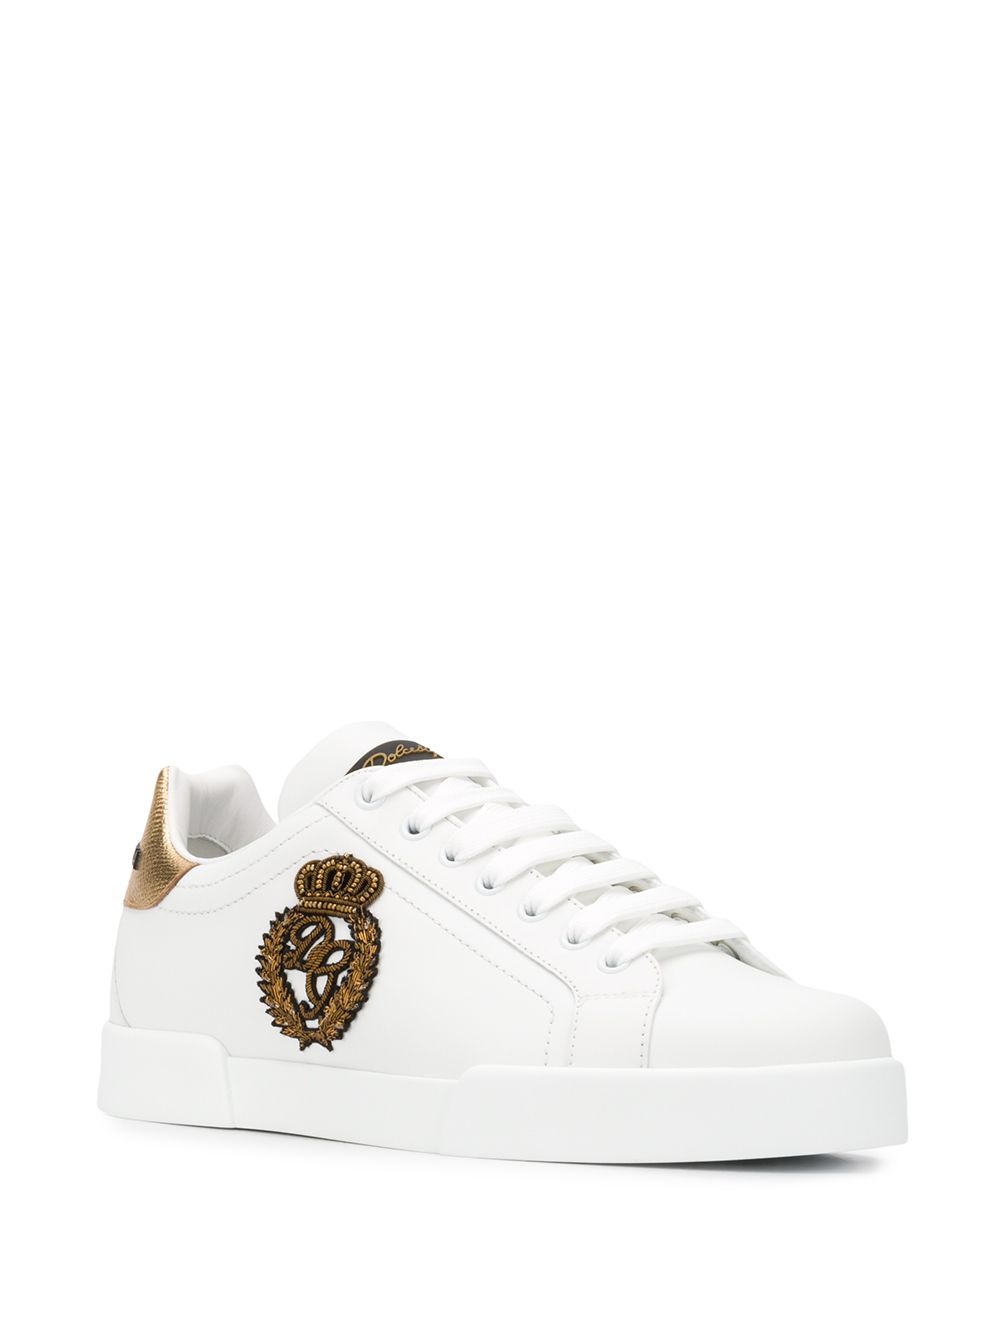 White sneaker with golden crown detail